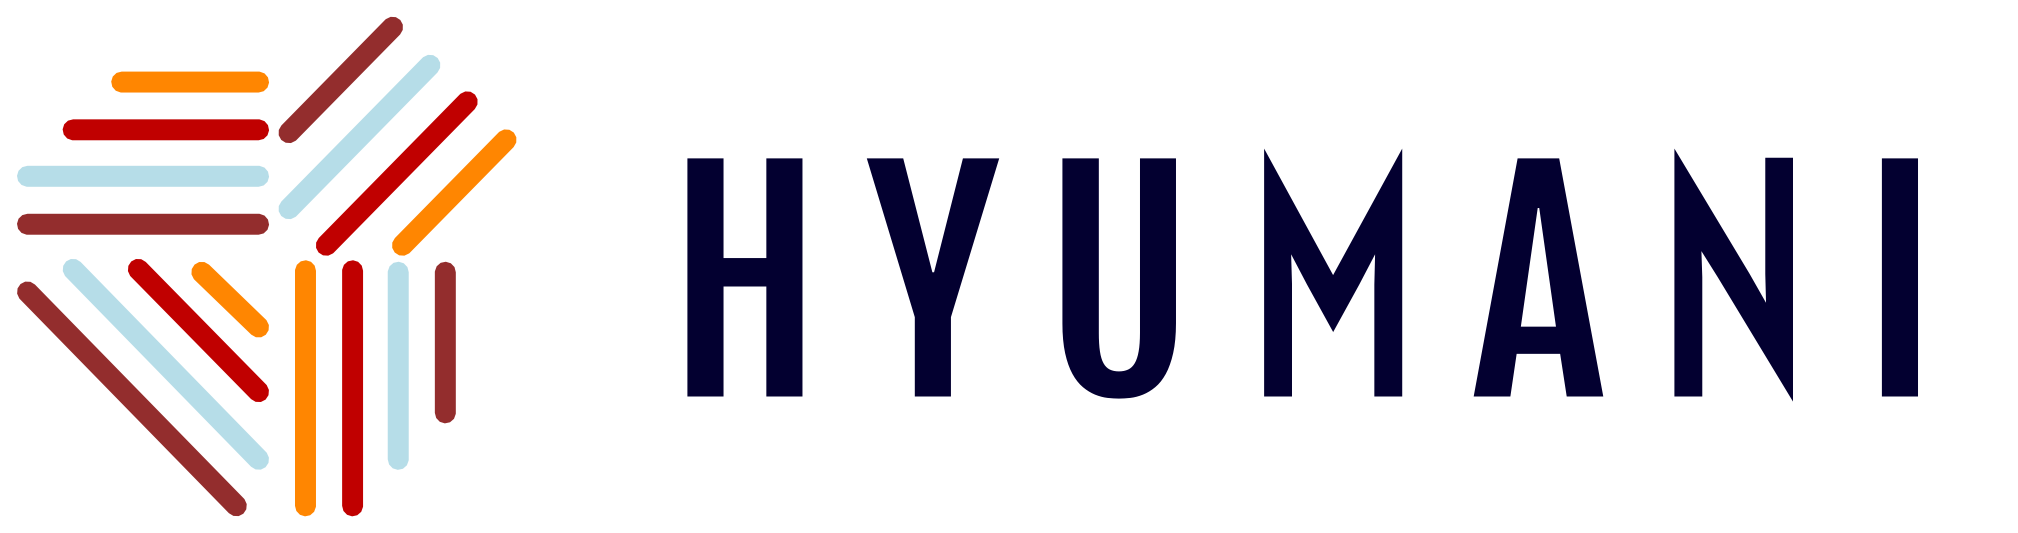 hyumani.com - solution to support competitiveness and character good traits